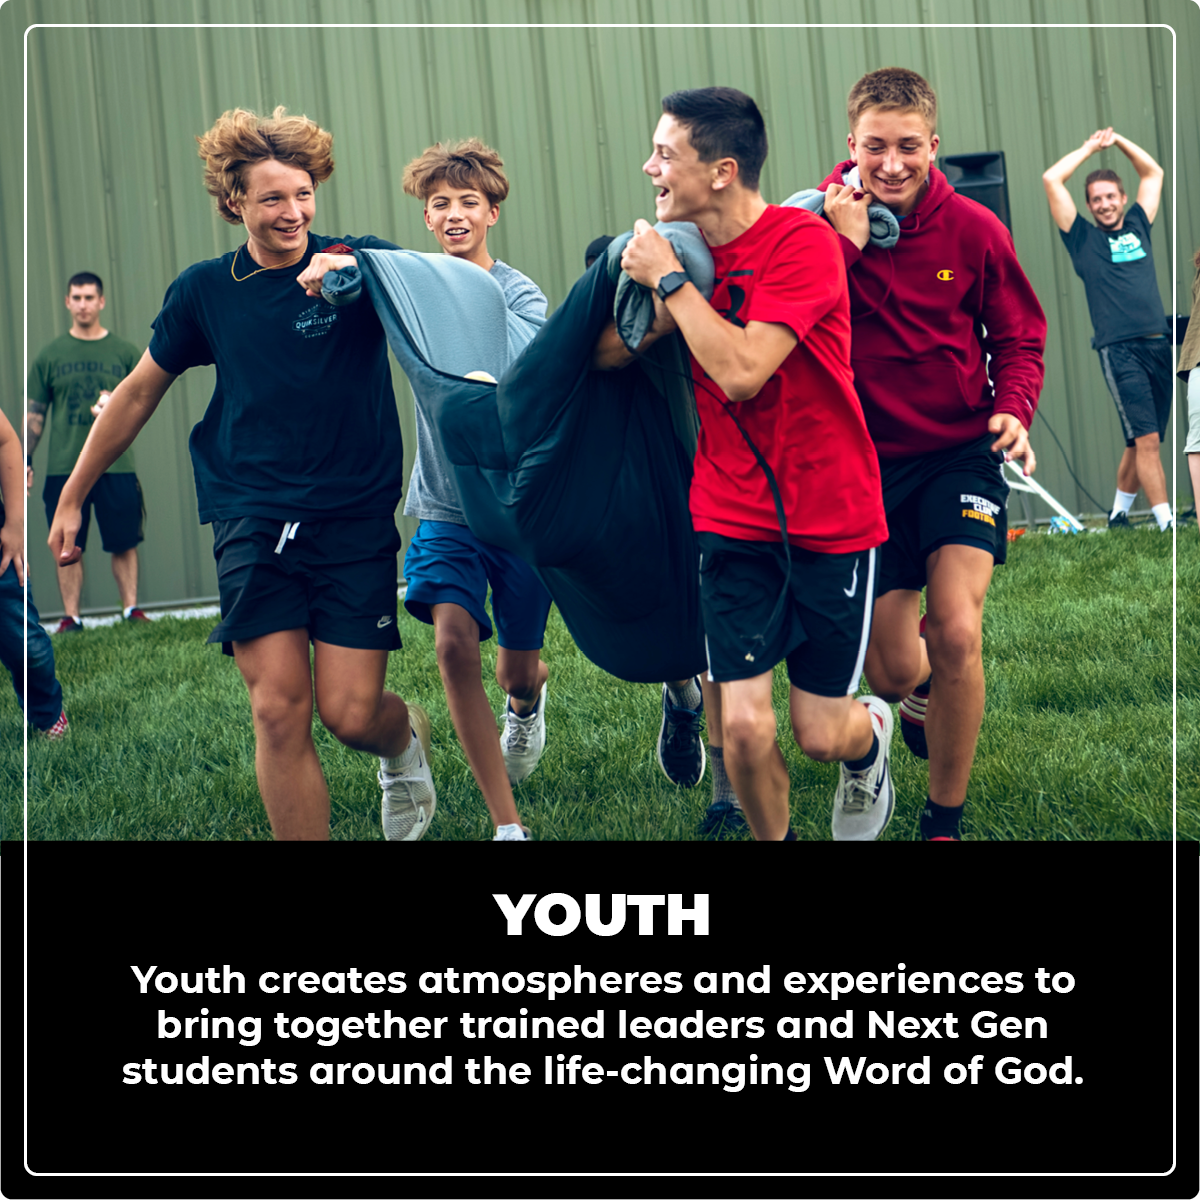 Youth:Youth creates atmospheres and experiences to bring together trained leaders and Next Gen students around the life-changing Word of God.